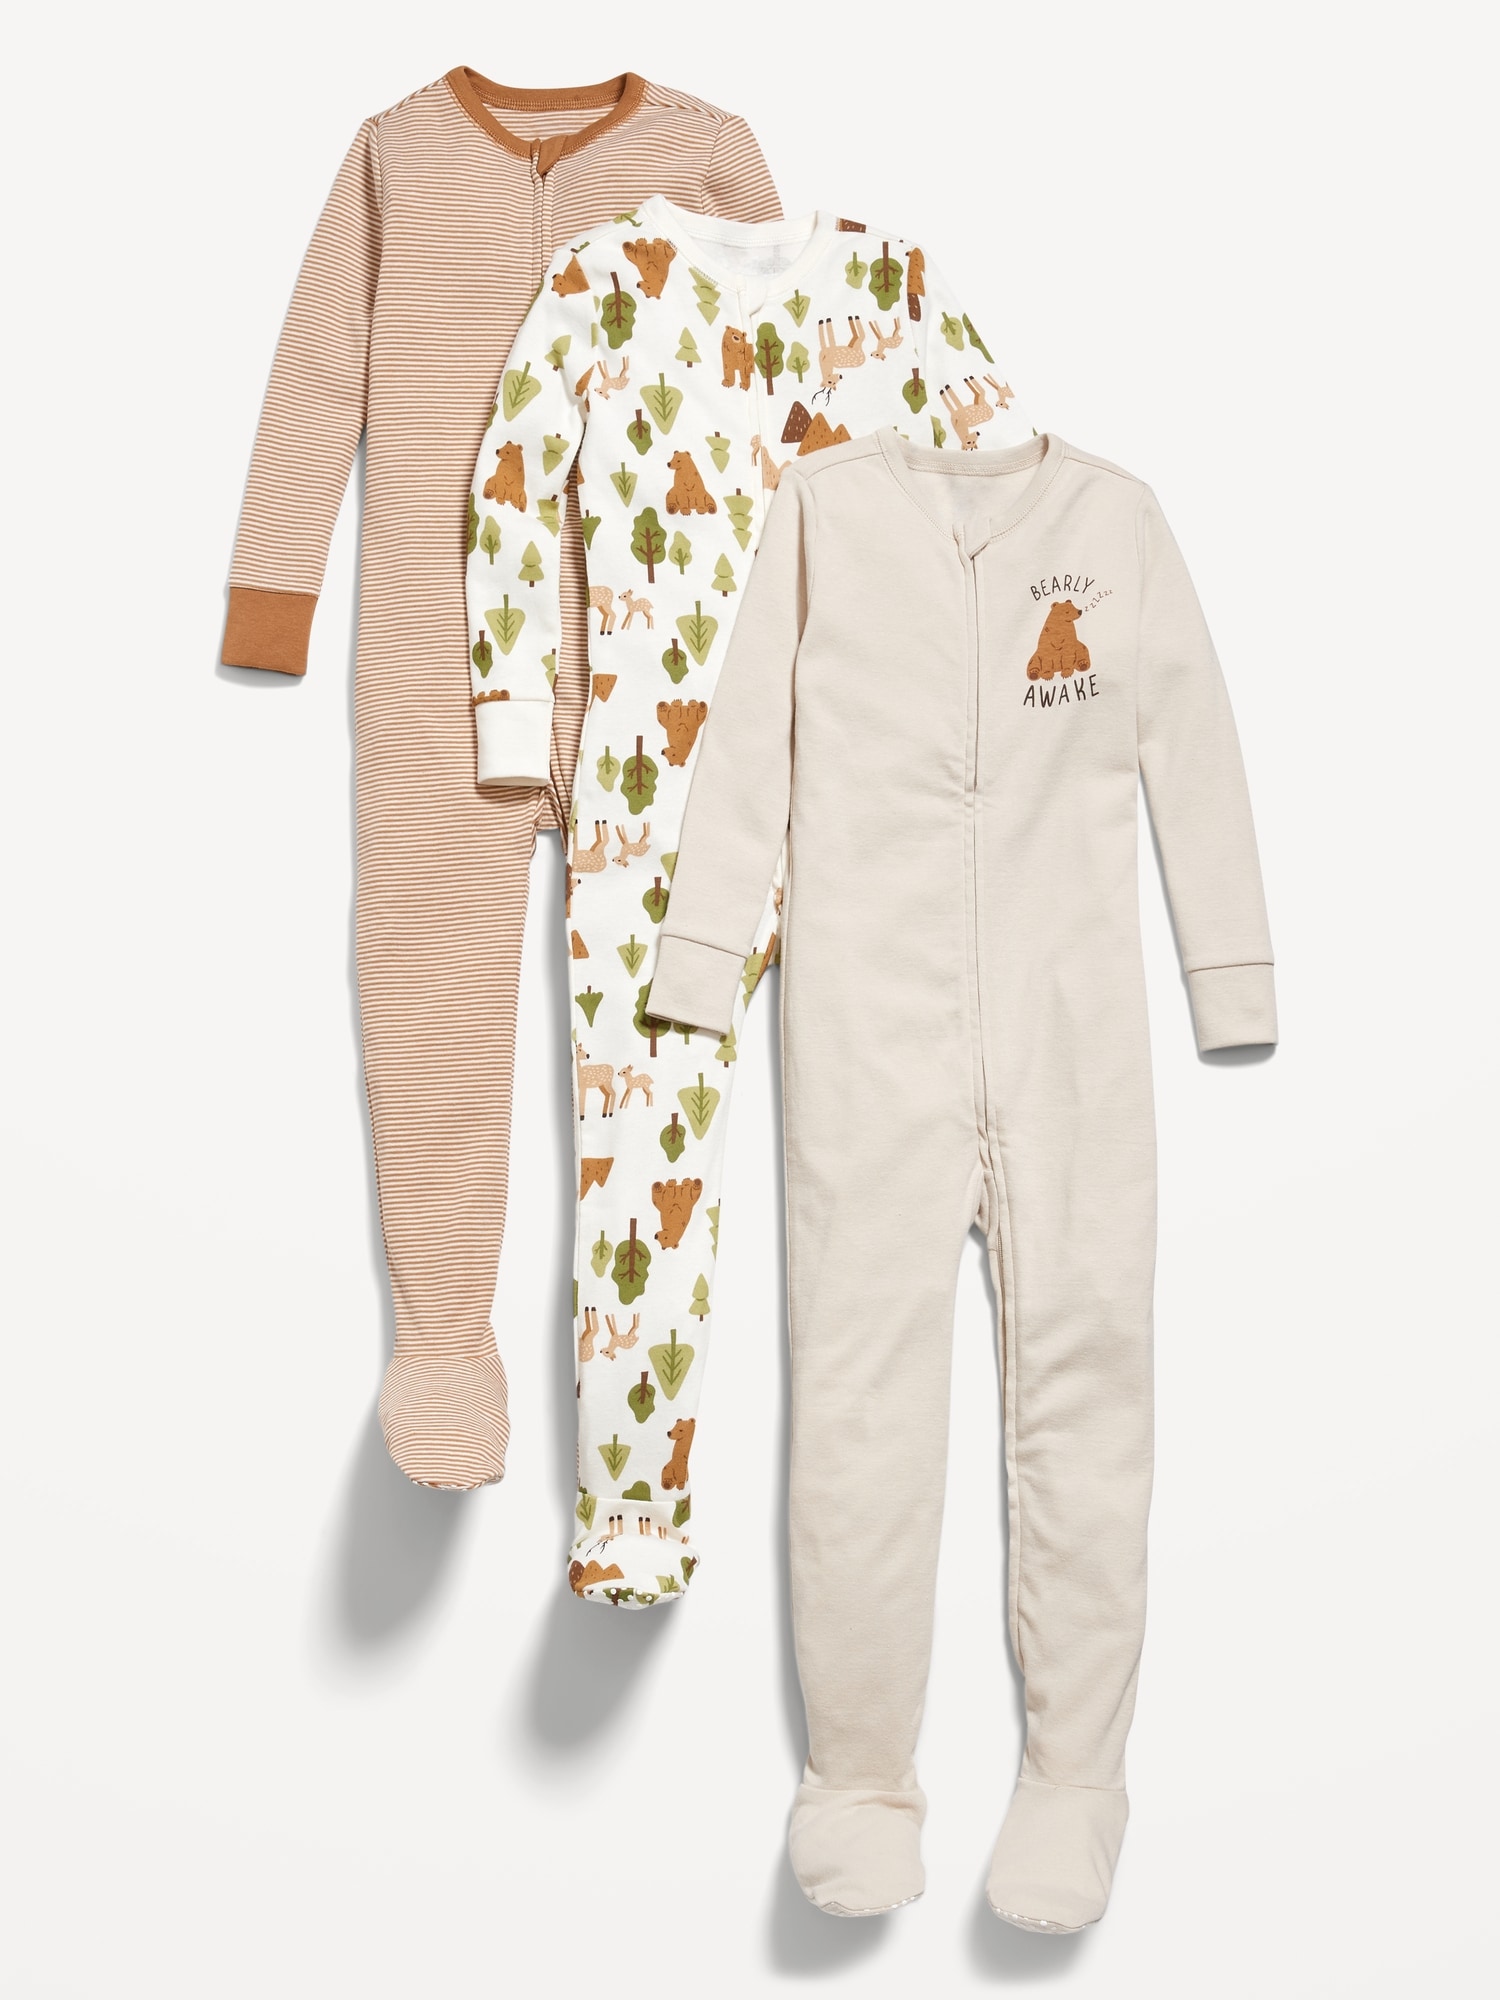 Oldnavy Unisex 2-Way-Zip Snug-Fit Printed Pajama One-Piece 3-Pack for Toddler & Baby Hot Deal